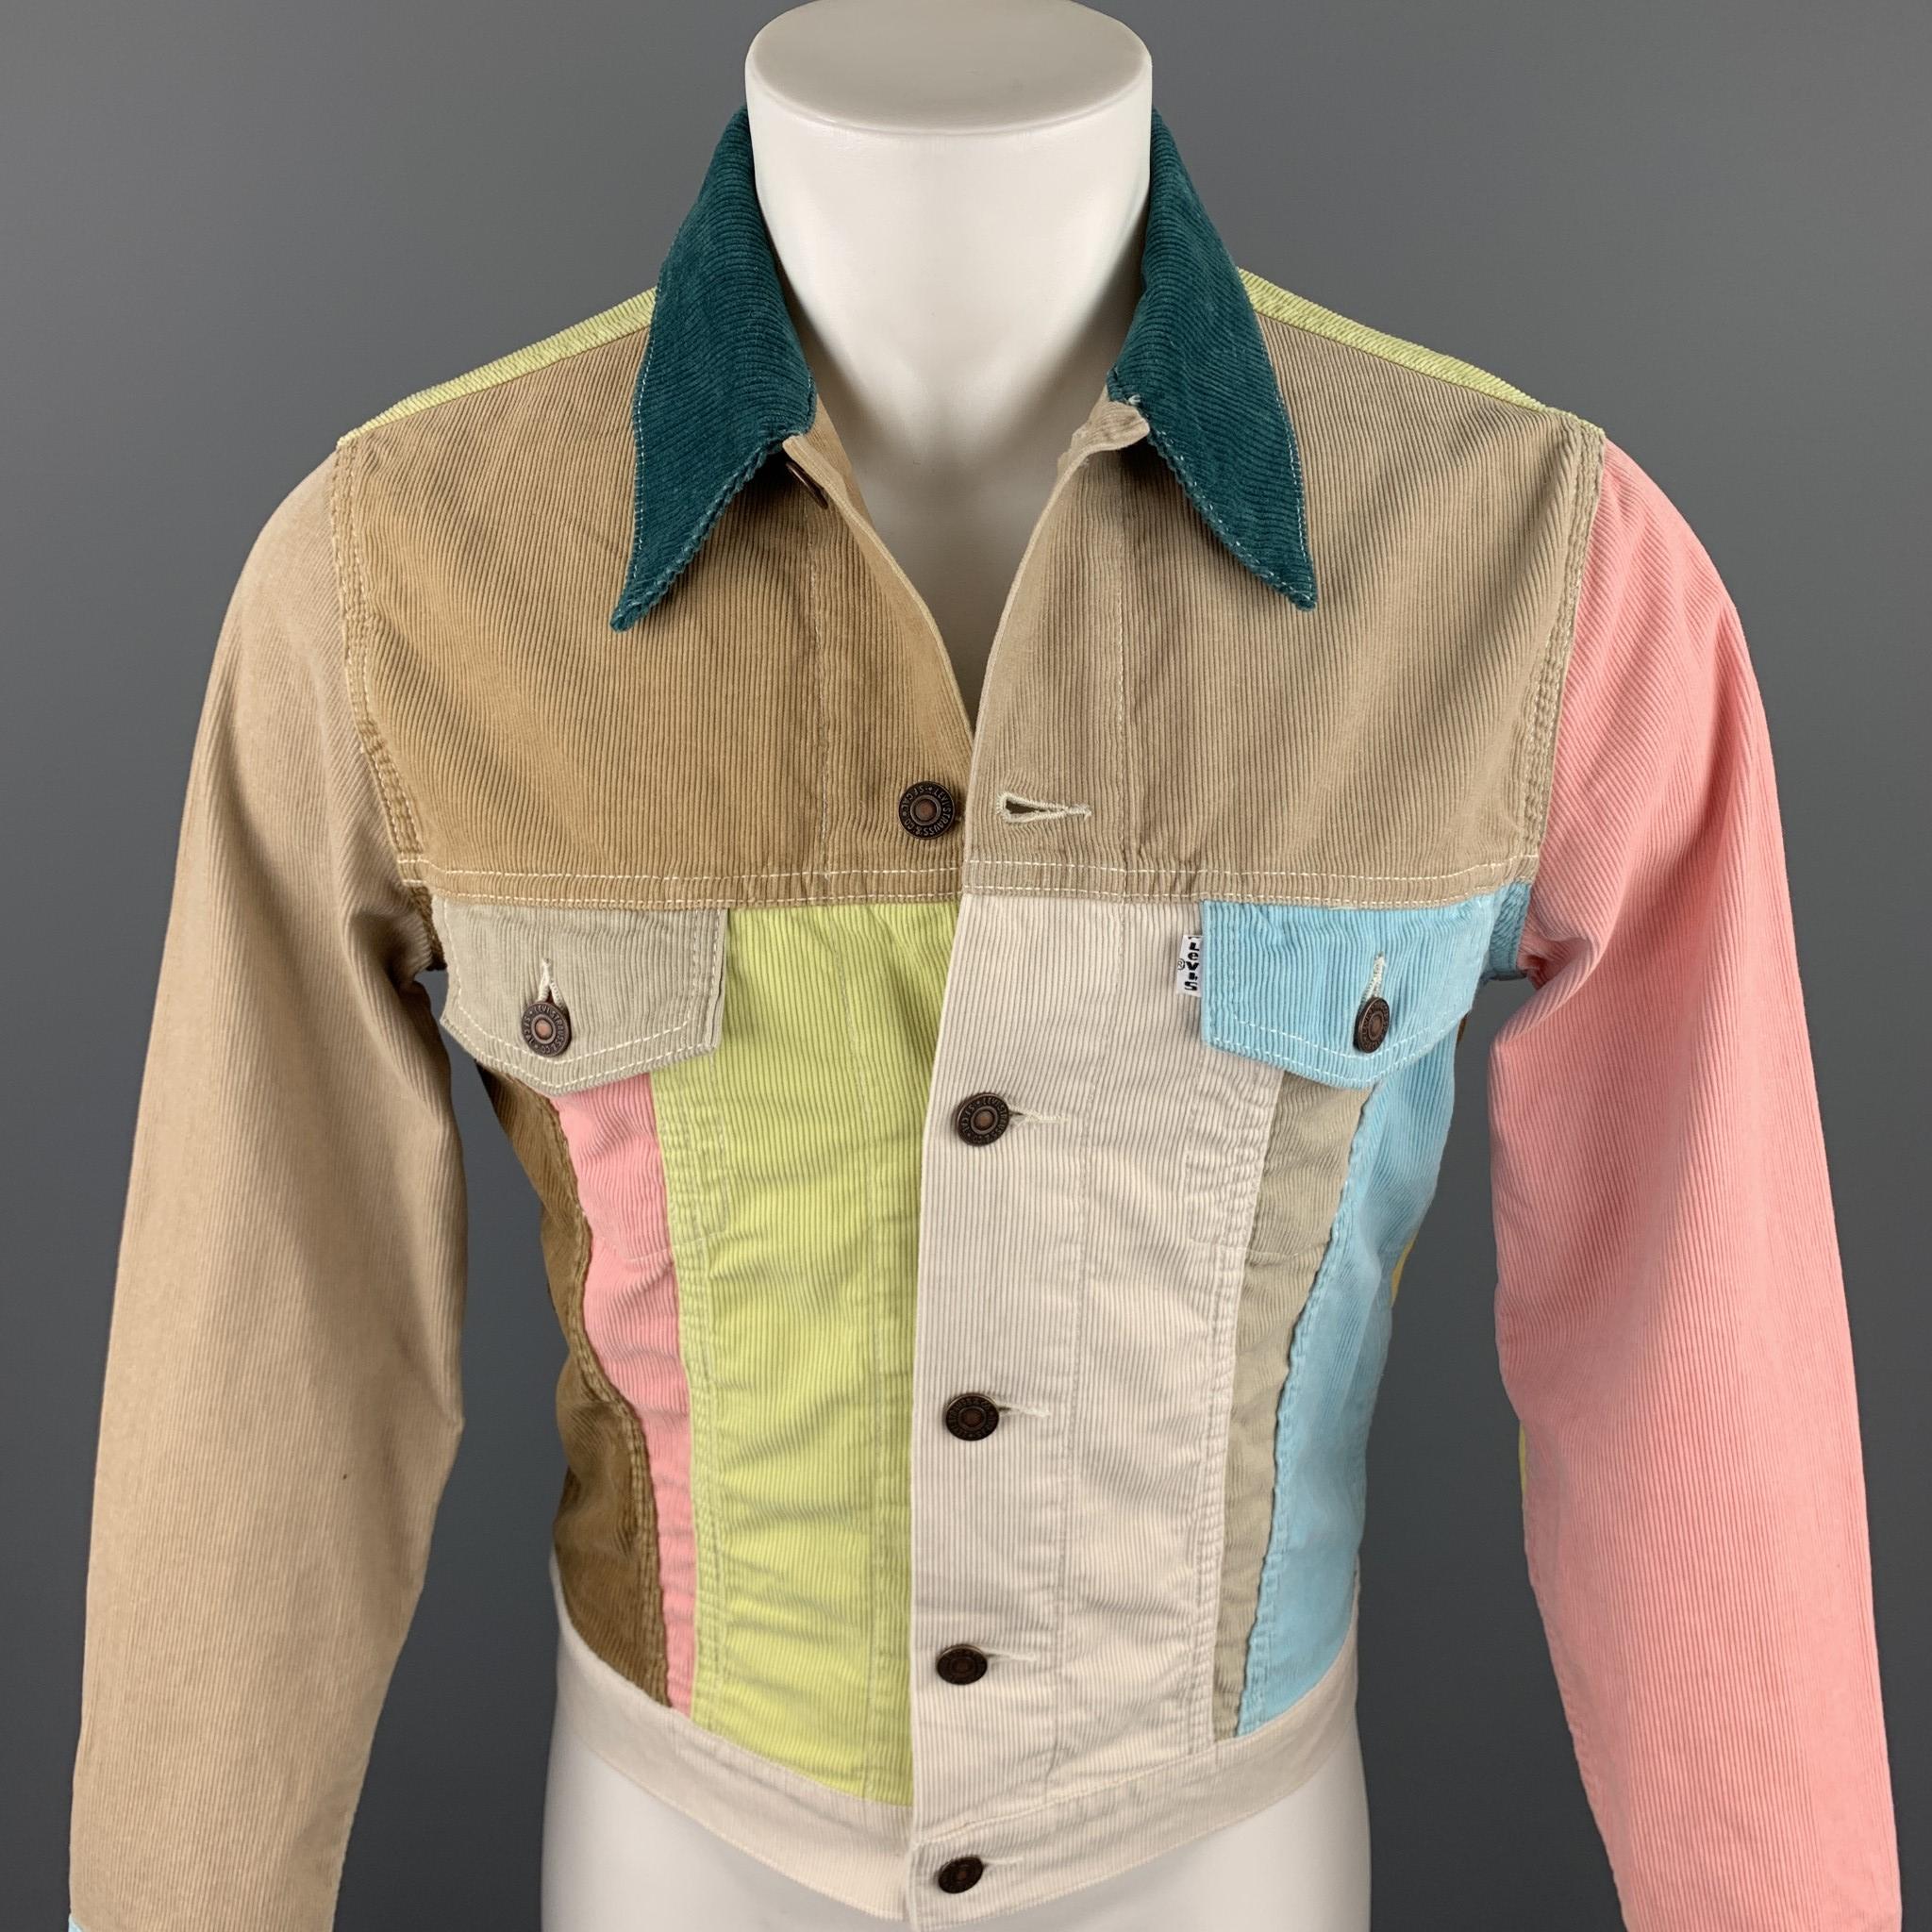 LEVI'S VINTAGE CLOTHING jacket comes in a multi-color corduroy with color block details throughout featuring a classic trucker style, flap pockets, pointed collar, and a buttoned closure.

New With Tags.
Marked: 38
Original Retail Price: